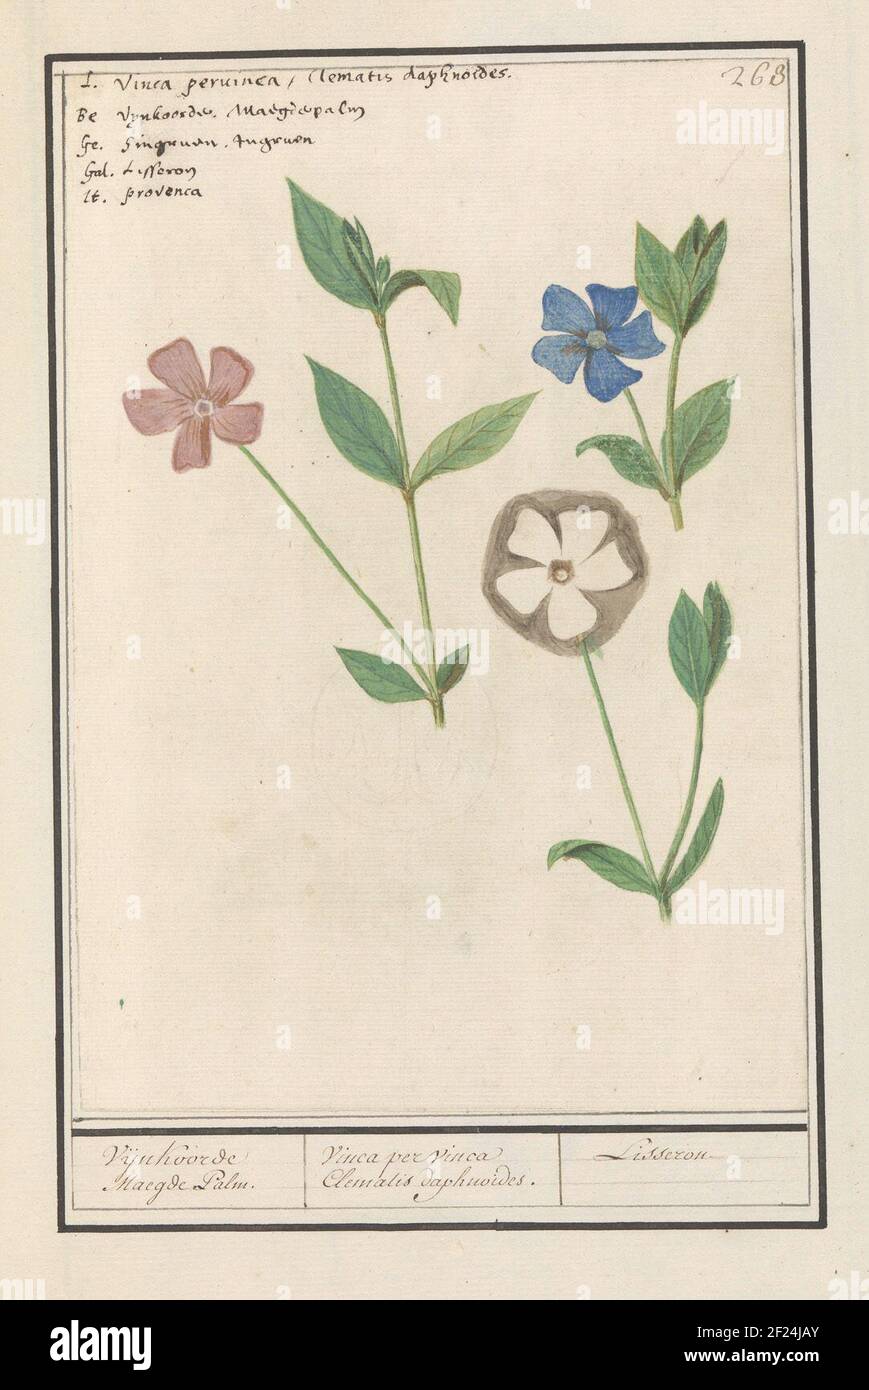 Maagdenpalm (Vinca); Vijnkoorde Maegde Palm. / Vinca per vinca Clematis daphnoides. / Lisseron.Periwinkle, in three colors. Numbered at the top right: 263. At the top right of the name in five languages. Part of the third album with drawings of flowers and plants. Tenth of twelve albums with drawings of animals, birds and plants known around 1600, made by Emperor Rudolf II. With explanation in Dutch, Latin and French. Stock Photo